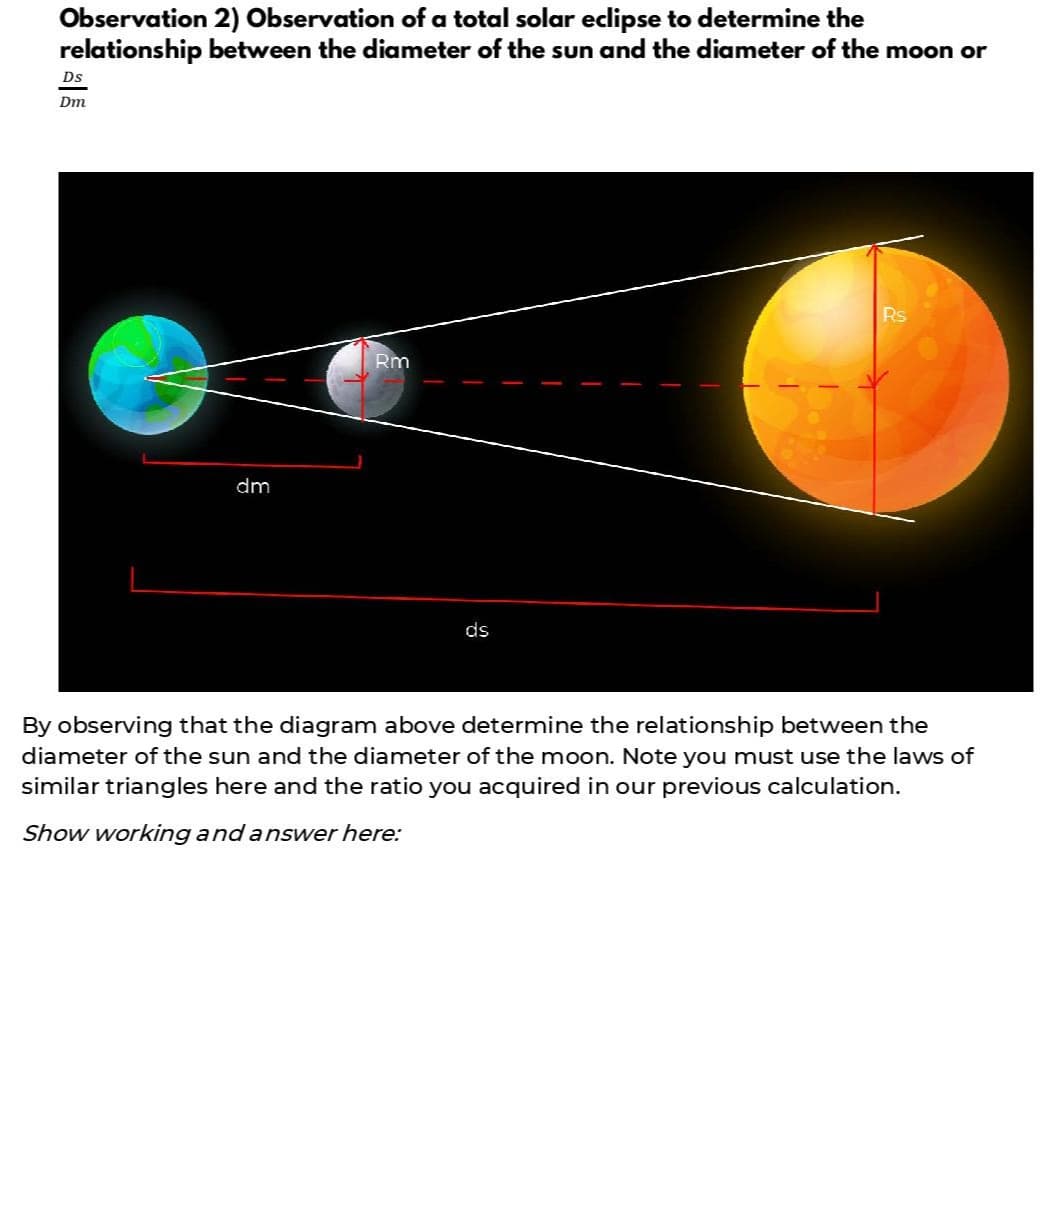 Observation 2) Observation of a total solar eclipse to determine the
relationship between the diameter of the sun and the diameter of the moon or
Ds
Dm
Rs
Rm
dm
ds
By observing that the diagram above determine the relationship between the
diameter of the sun and the diameter of the moon. Note you must use the laws of
similar triangles here and the ratio you acquired in our previous calculation.
Show working and answer here:
